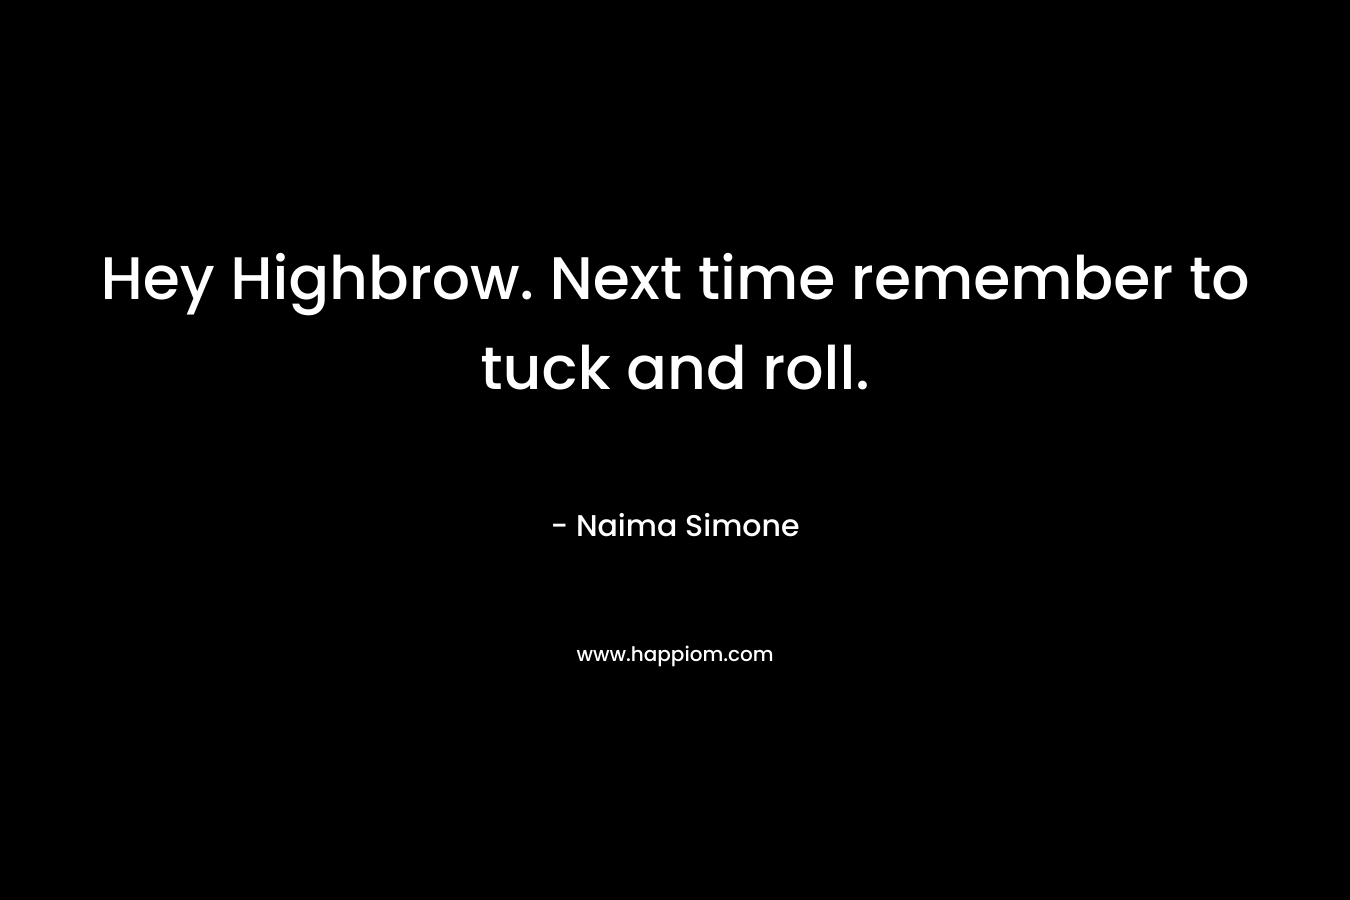 Hey Highbrow. Next time remember to tuck and roll. – Naima Simone